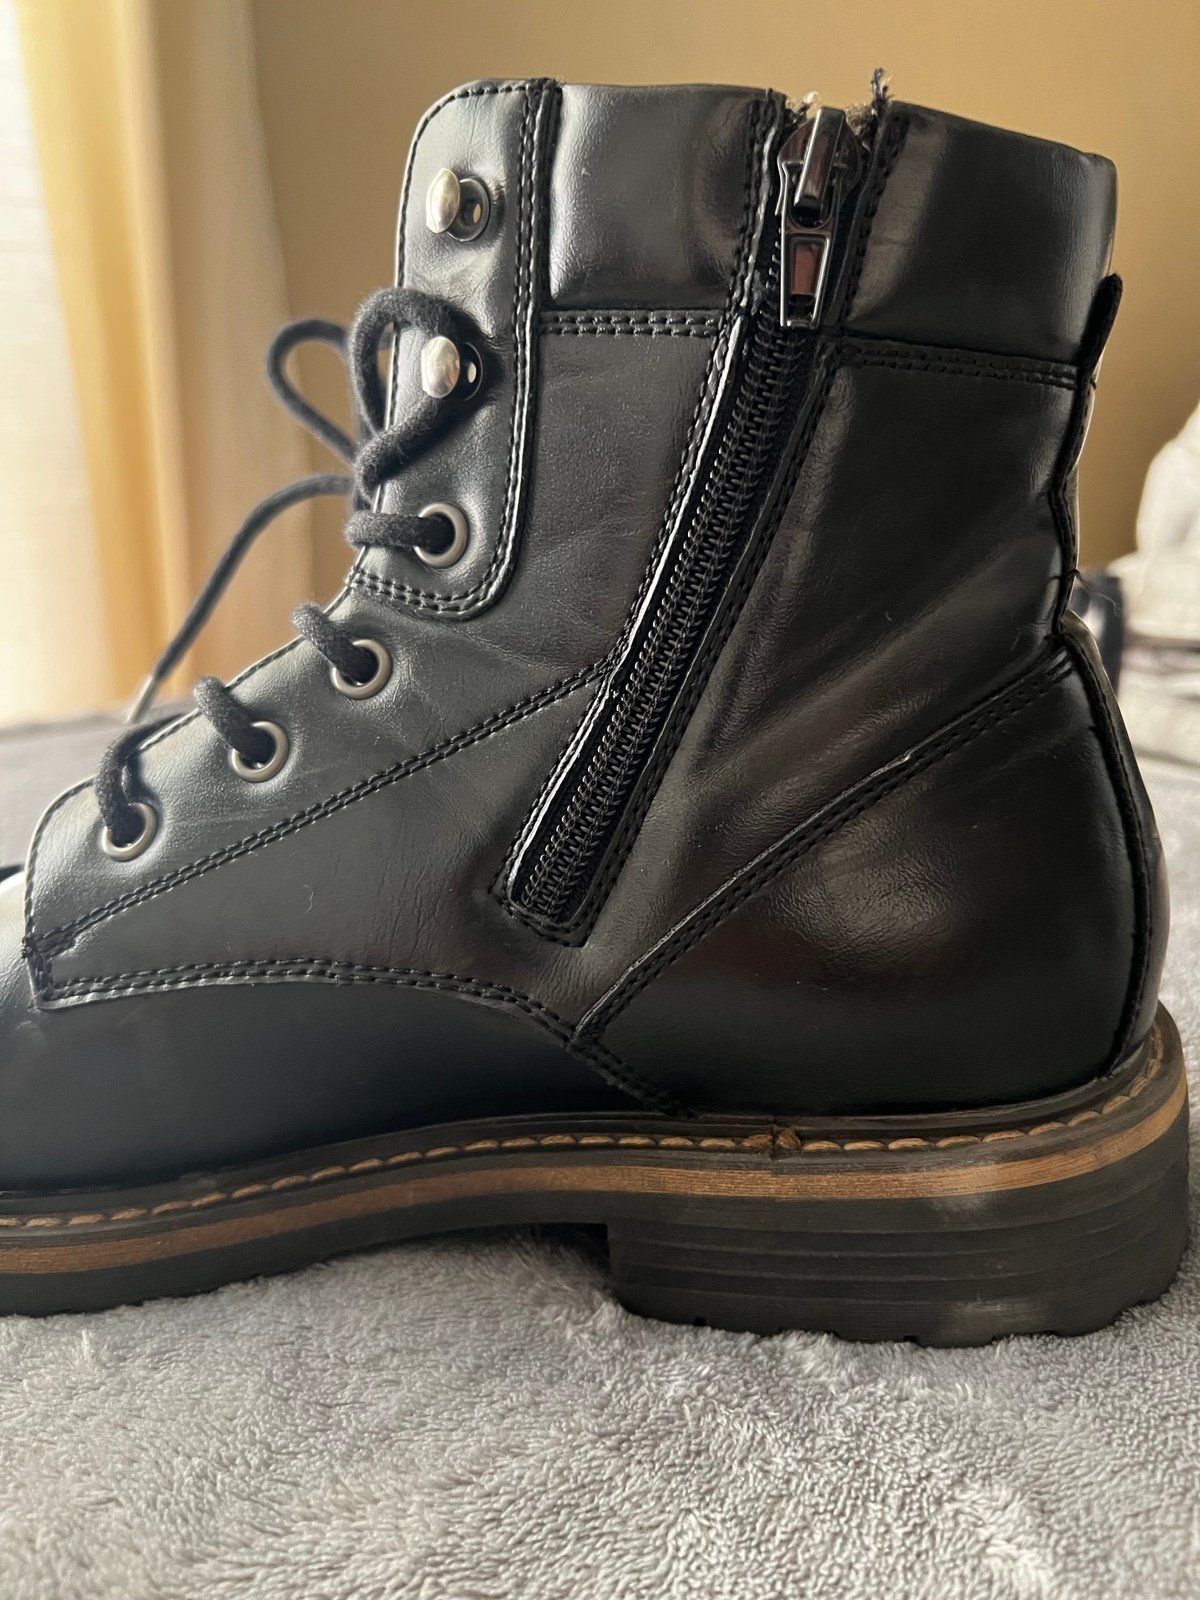 reasonable price Public Opinion Men Size 8.5M Boots NKosT00I1 Online Exclusive